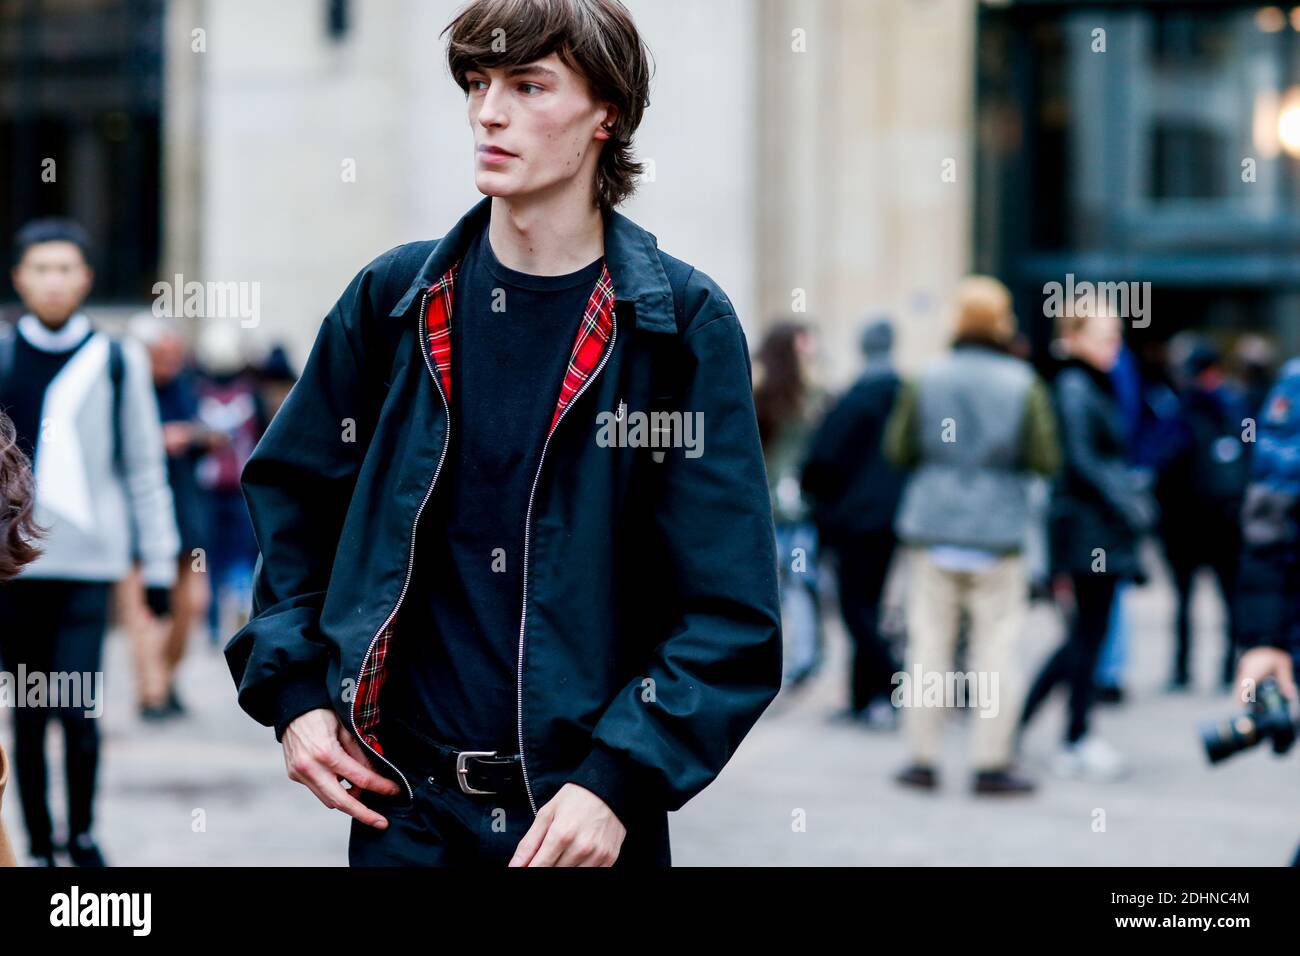 Street style, model after Paul Smith Fall-Winter 2016-2017 menswear show  held at Bourse de Commerce, in Paris, France, on January 24th, 2016. Photo  by Marie-Paola Bertrand-Hillion/ABACAPRESS.COM Stock Photo - Alamy